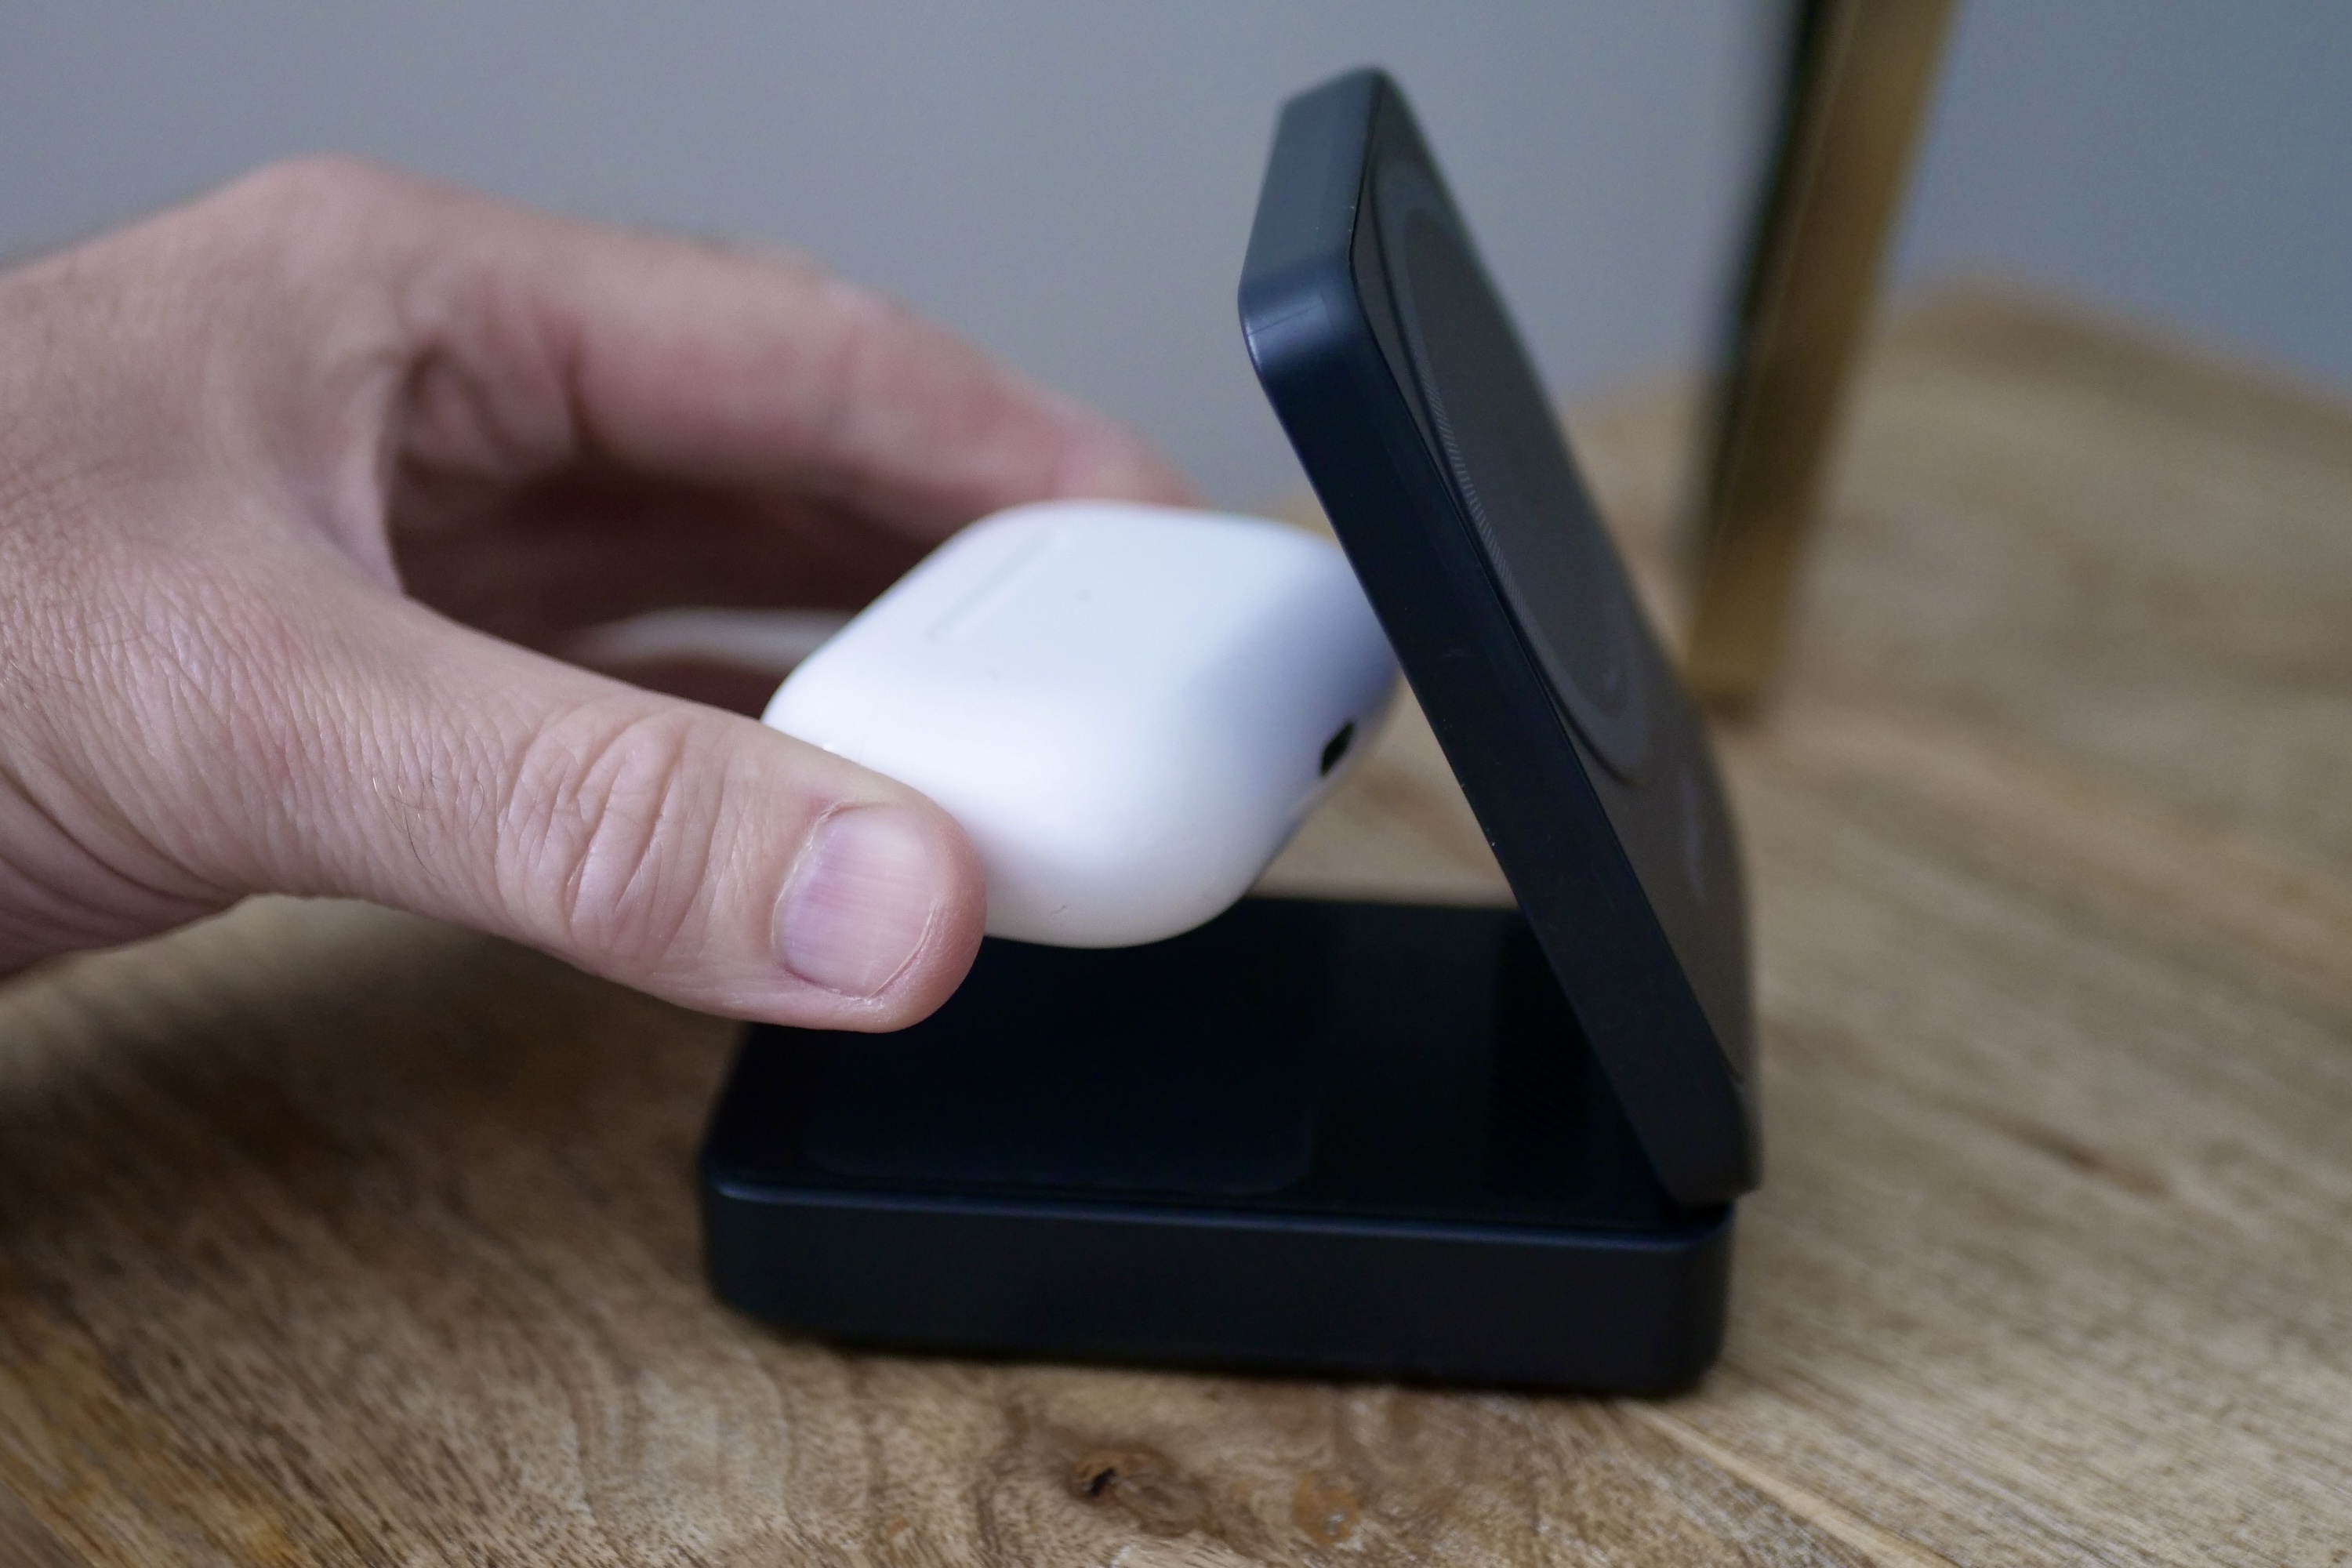 A person putting Apple AirPods on charge using the Anker MagGo Wireless Charging Station.